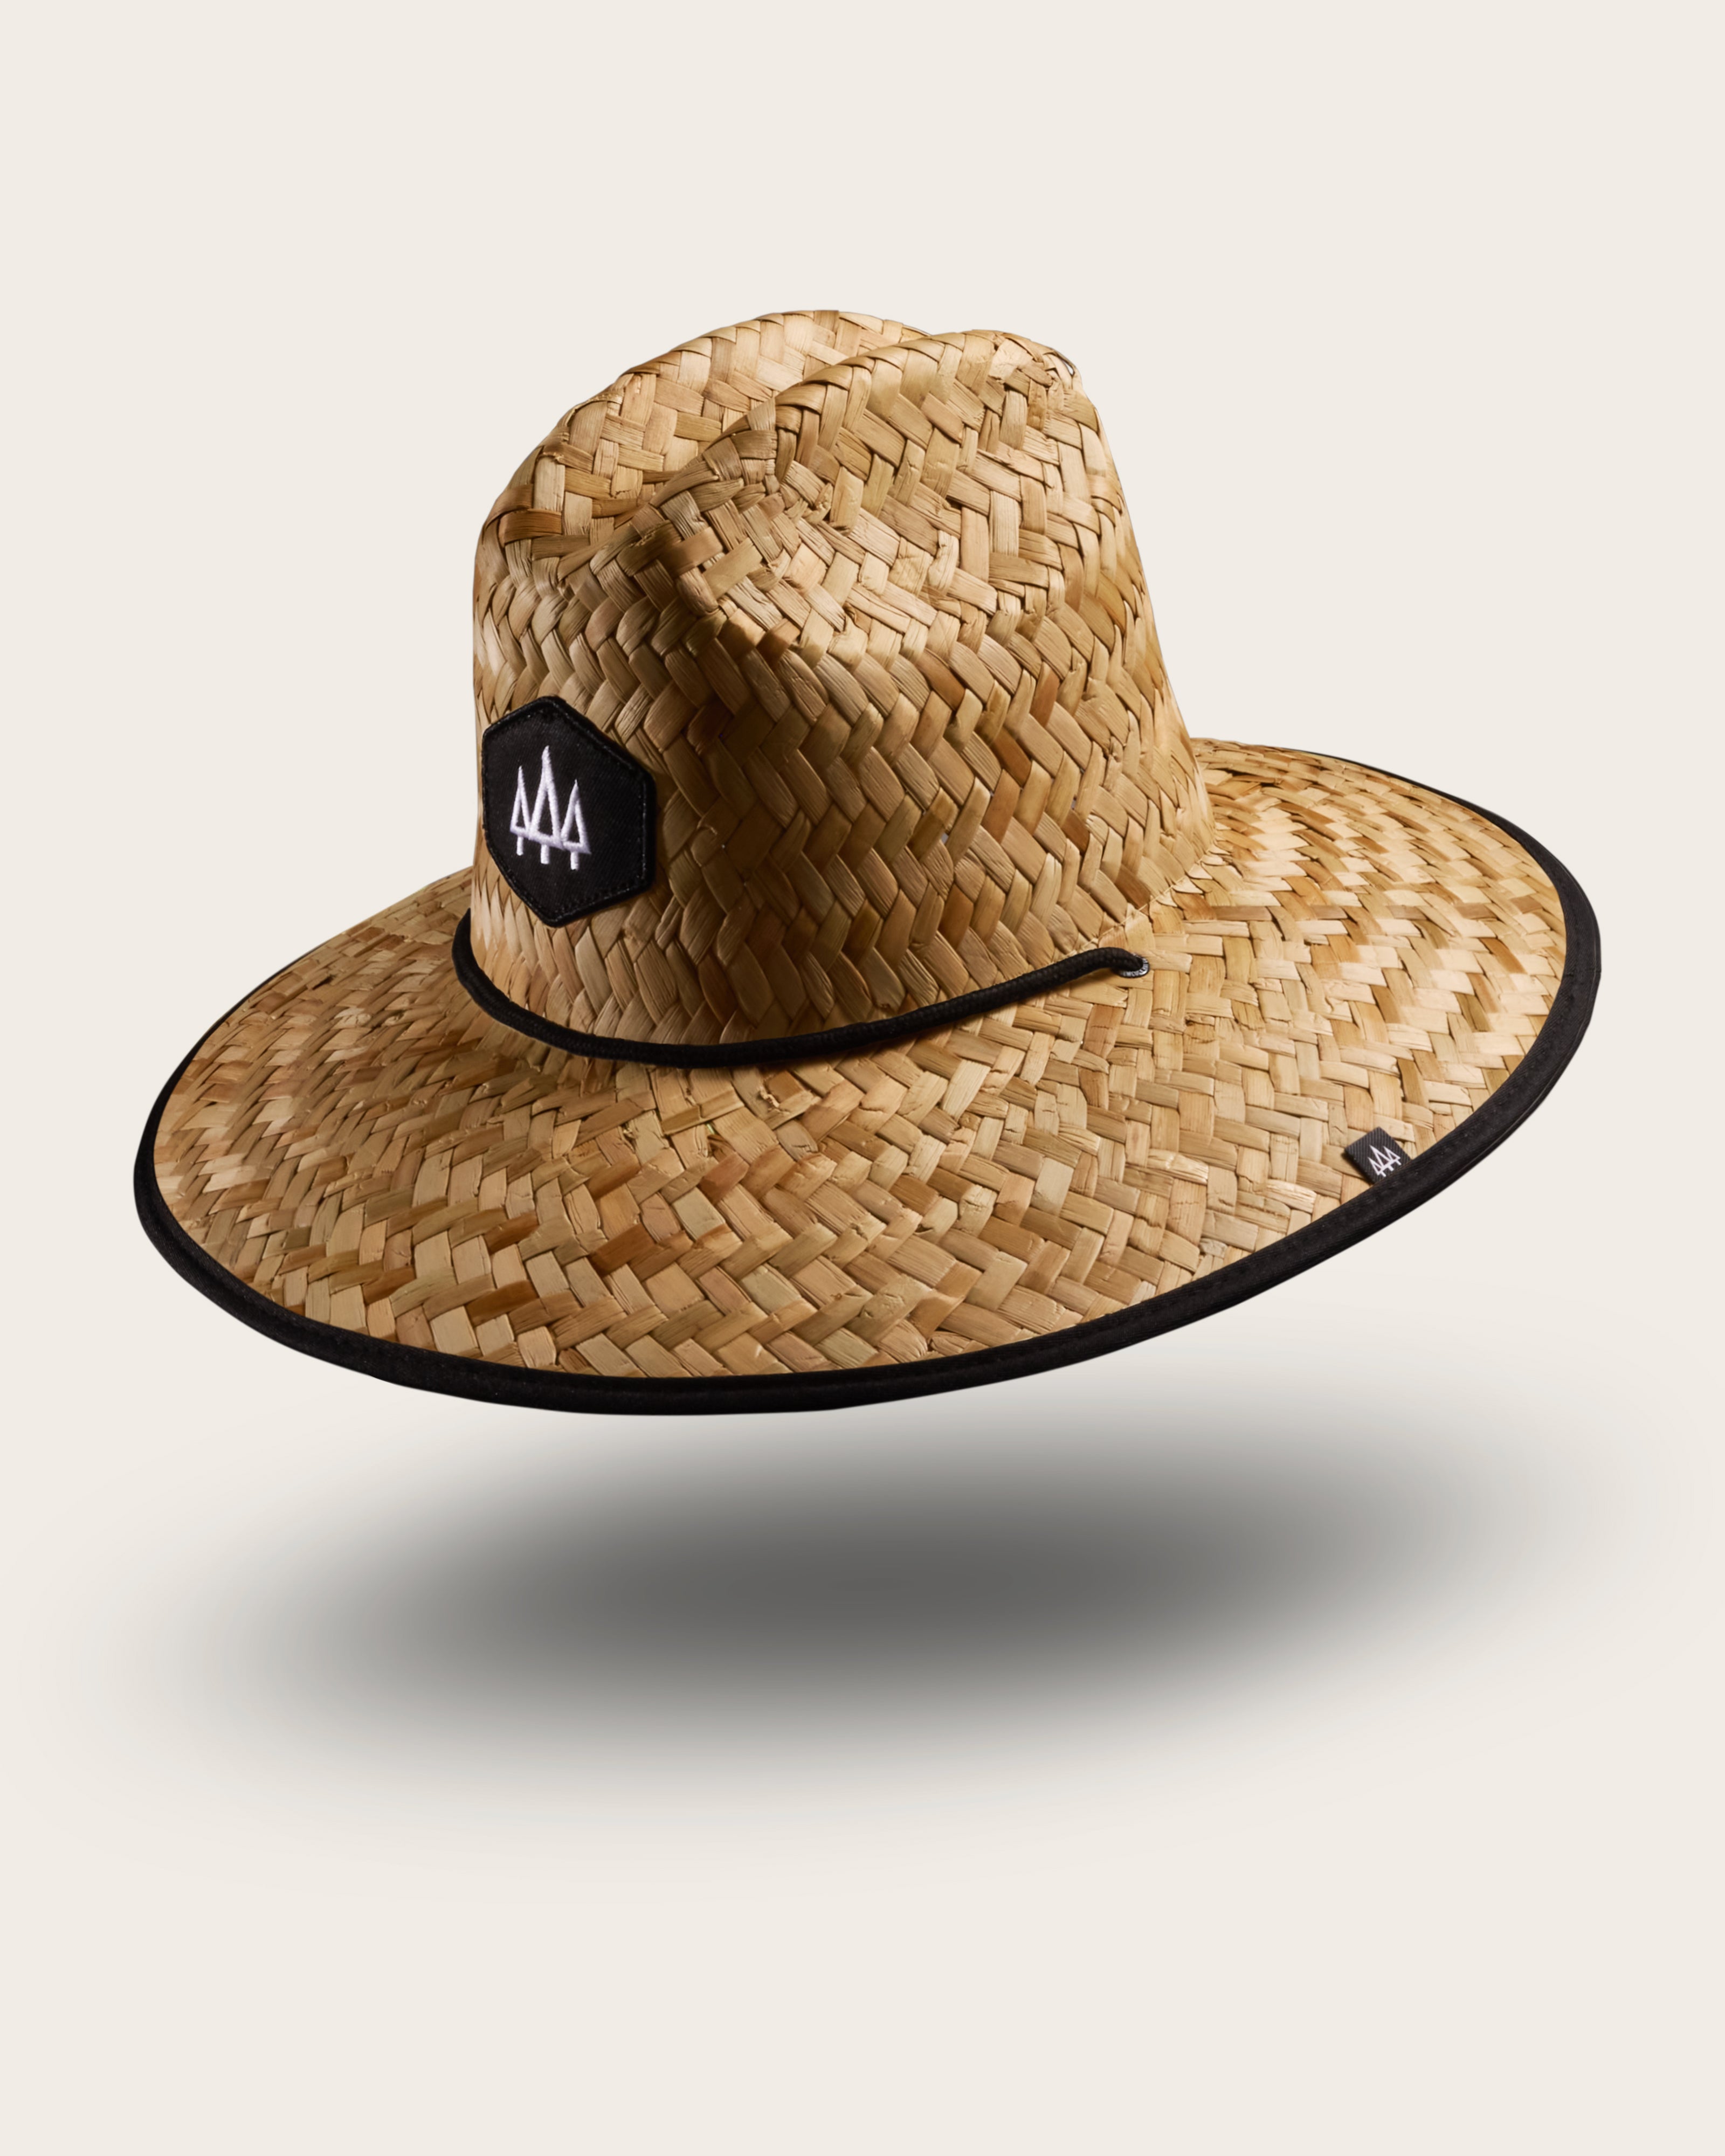 Hemlock Blackout straw lifeguard hat with Black color with patch